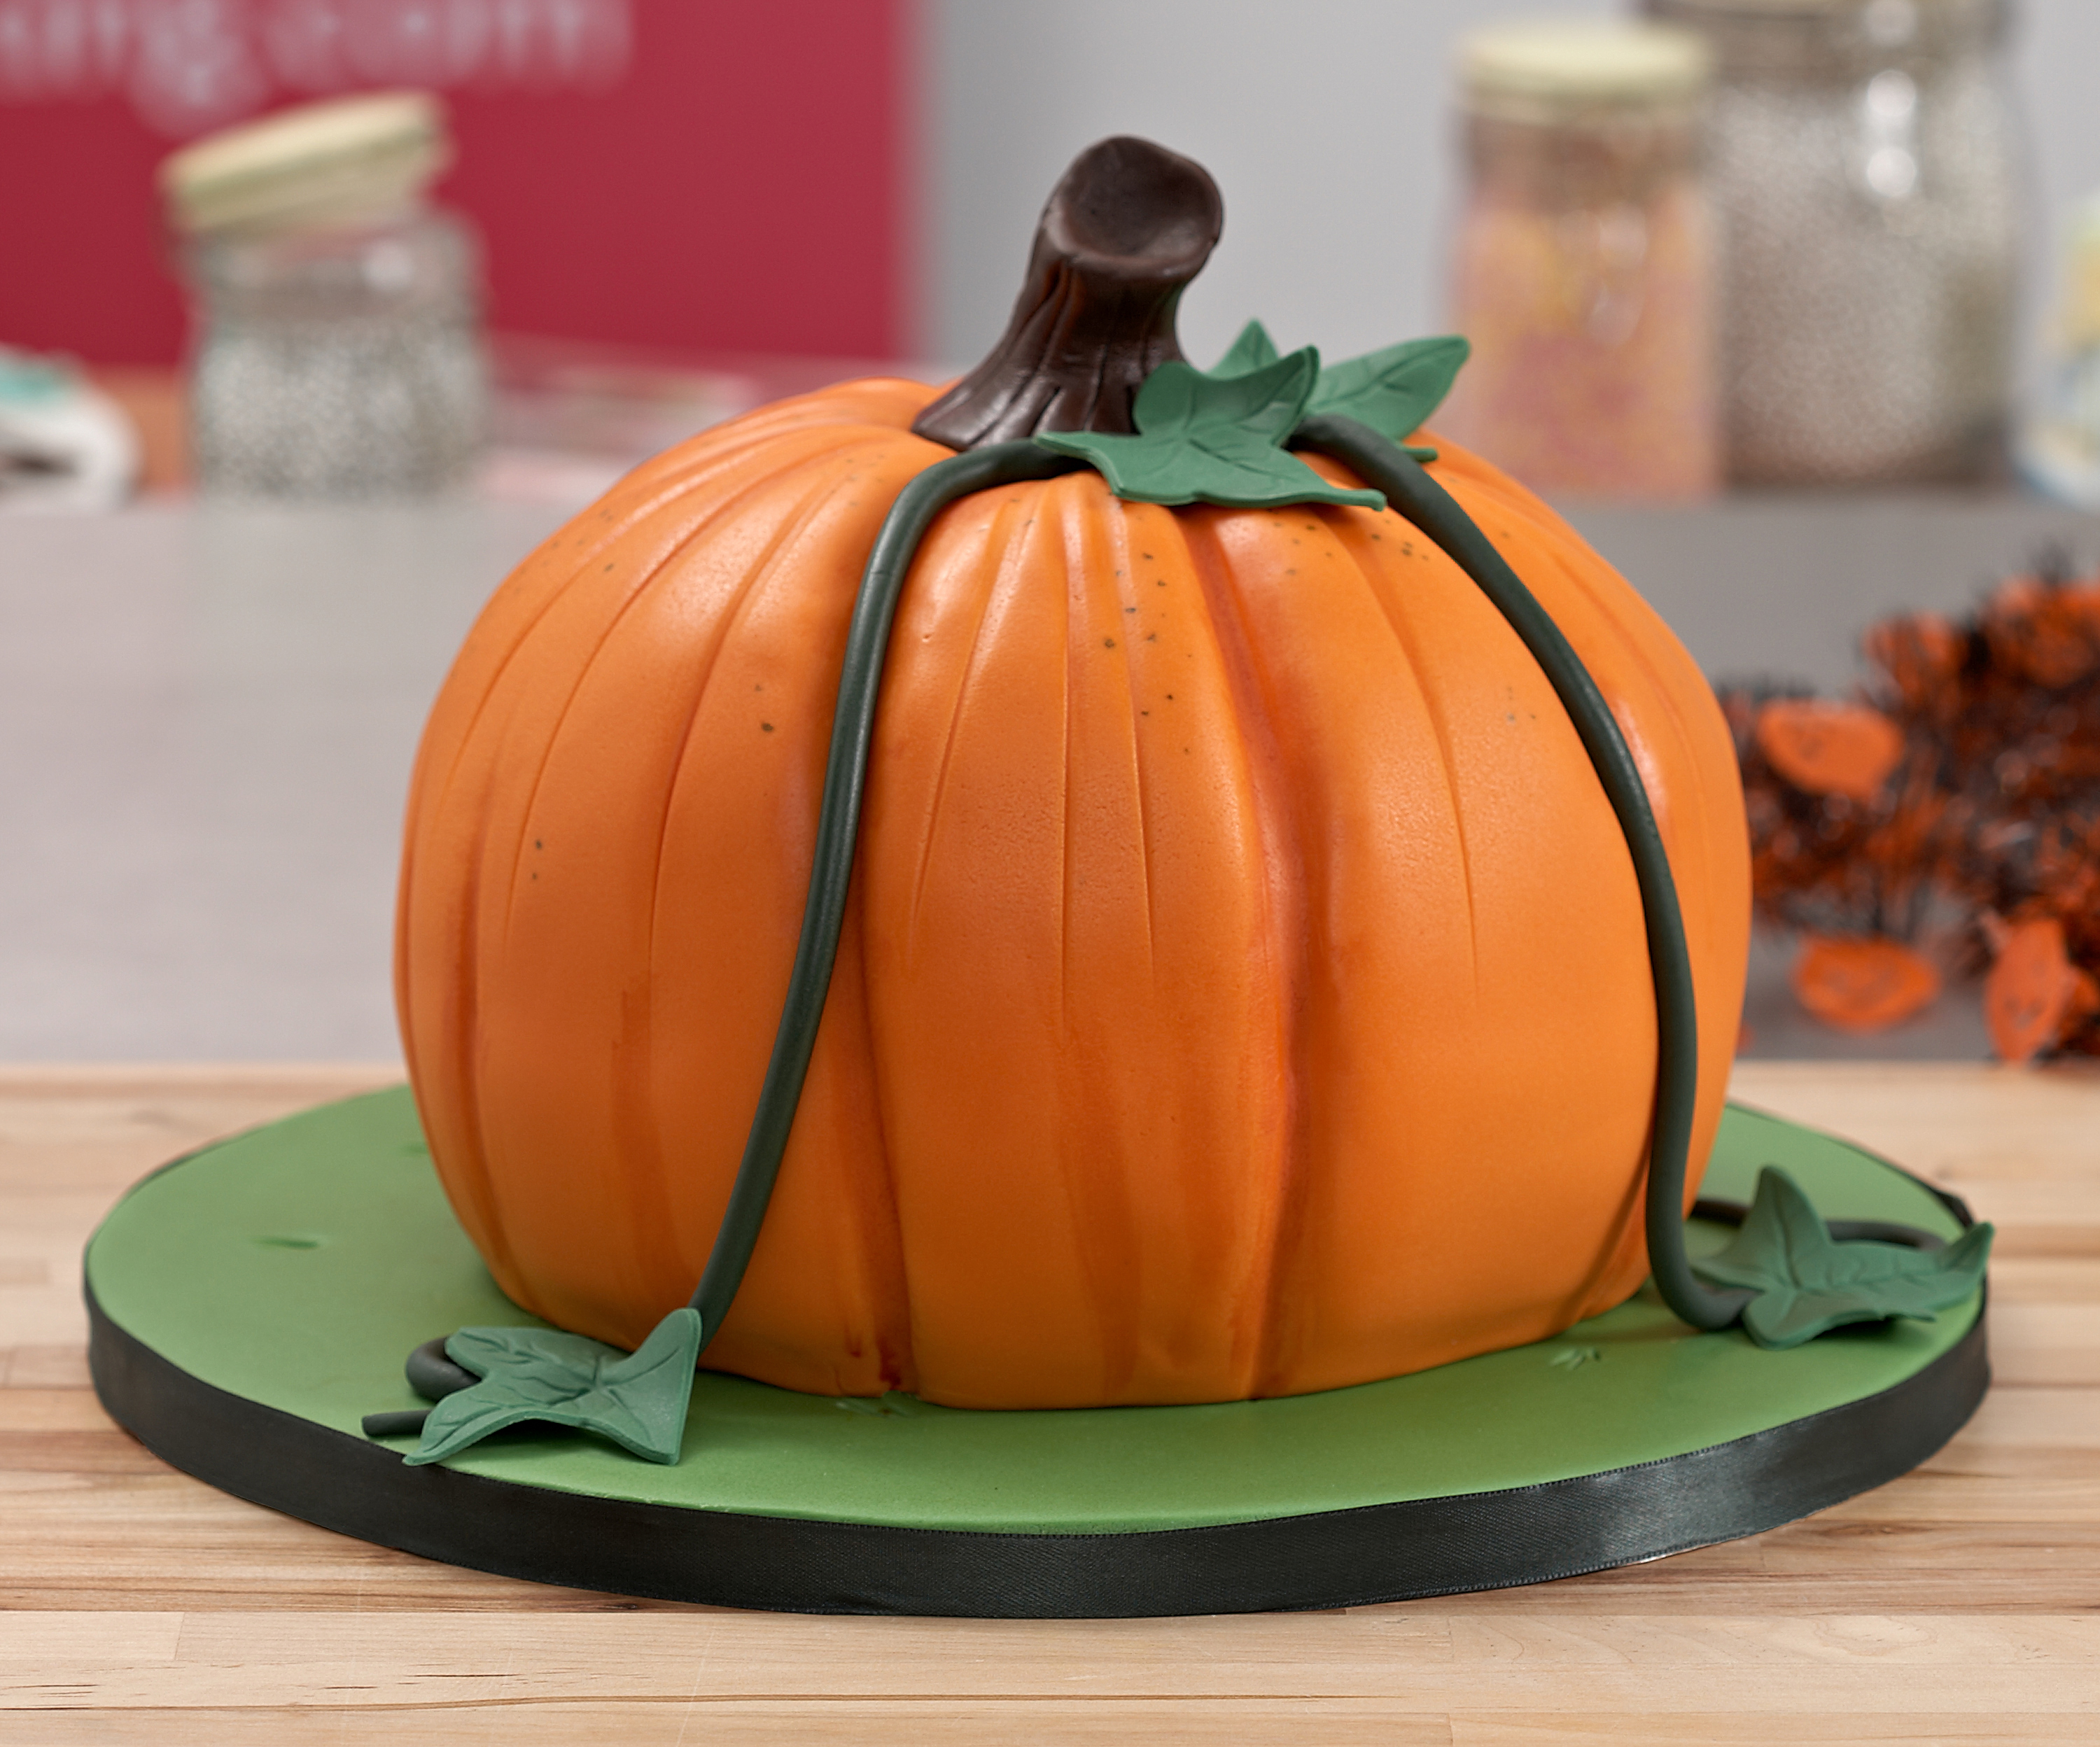 How to Carve and Decorate a Pumpkin Cake